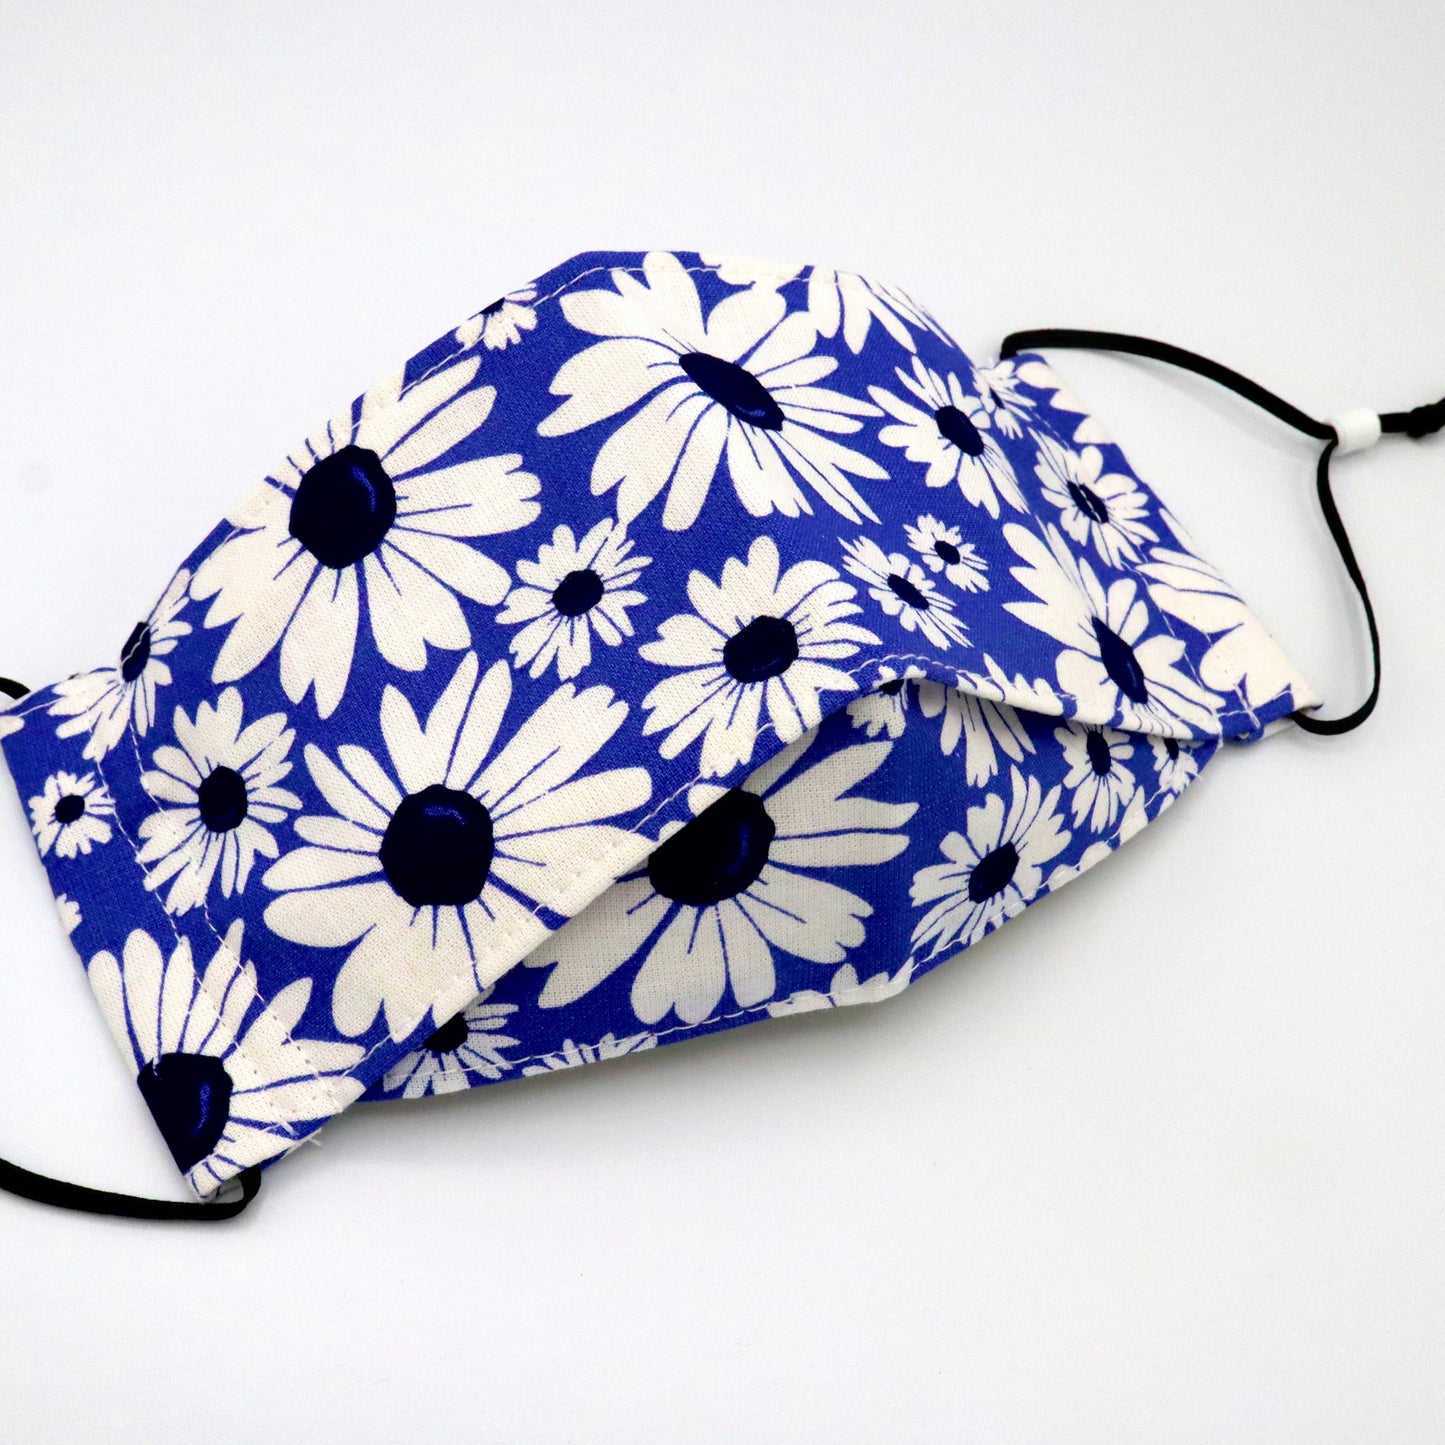 Blue Daisies | 3D Face Mask with Nose Wire, Adjustable Ear Loops, and Optional Filter Pocket